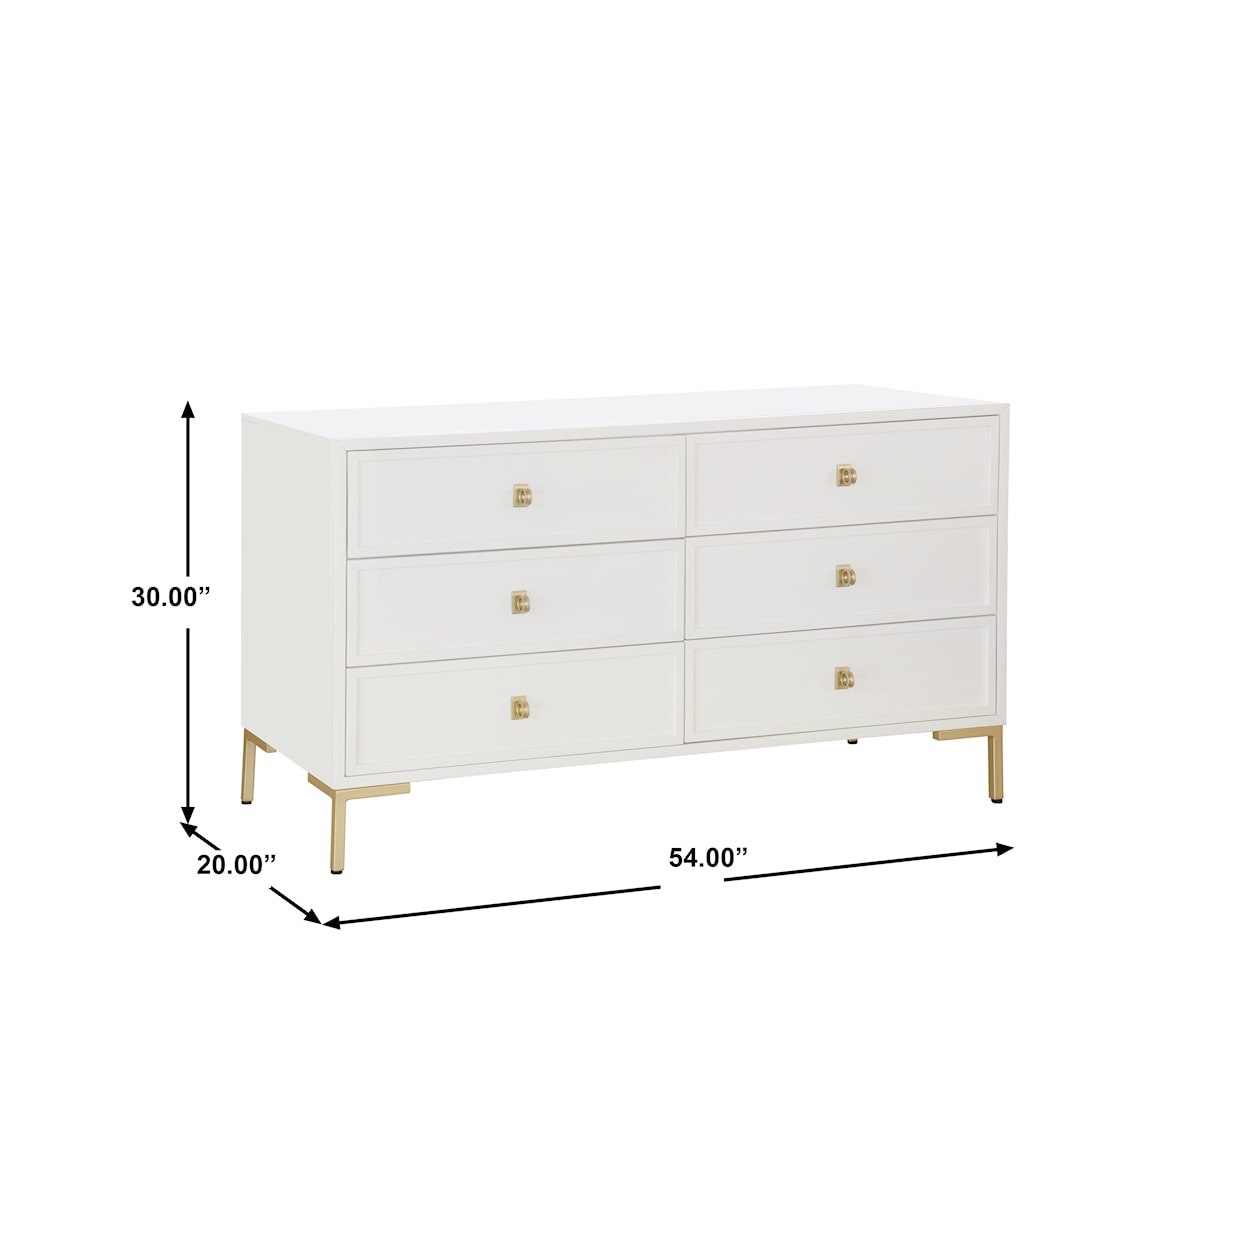 Accentrics Home Accents White and Gold Four Door Sideboard